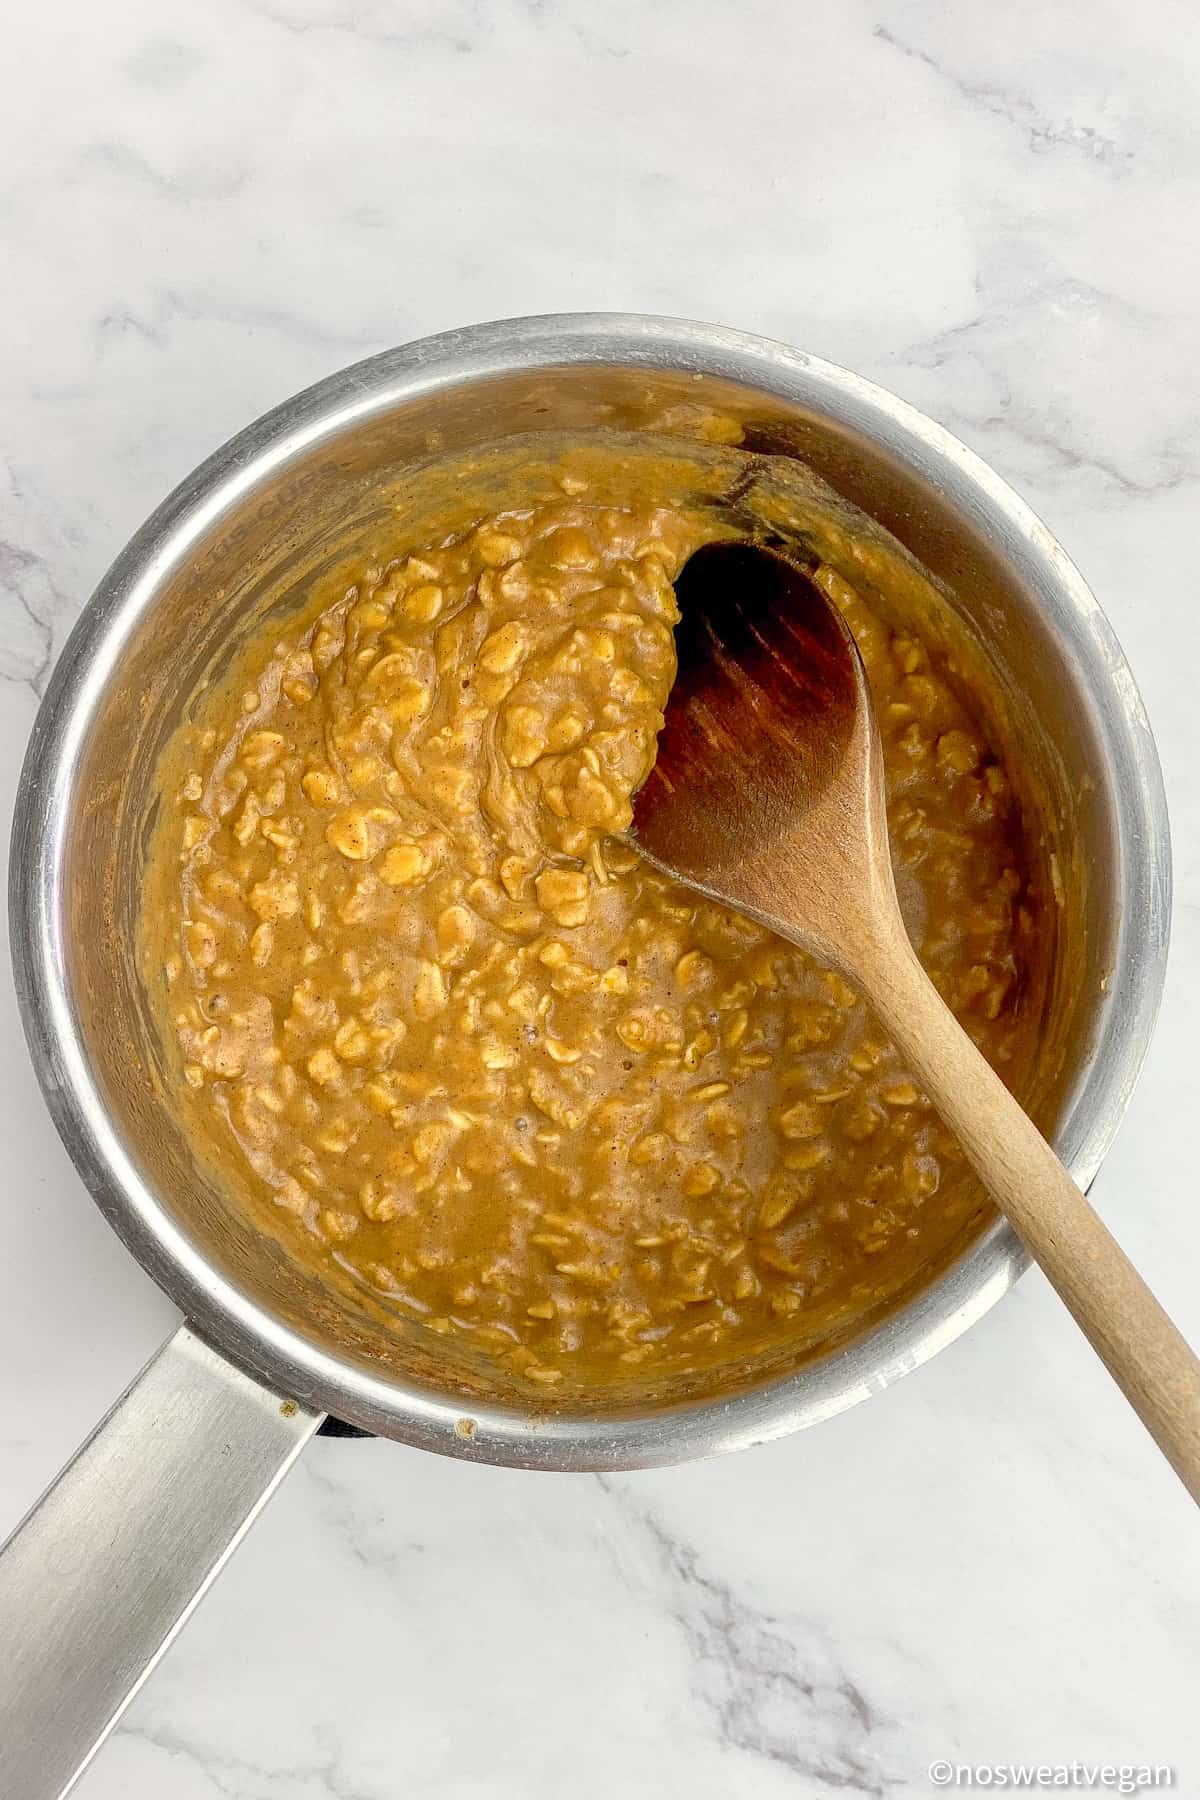 Pumpkin spice oatmeal cooked in a pot.